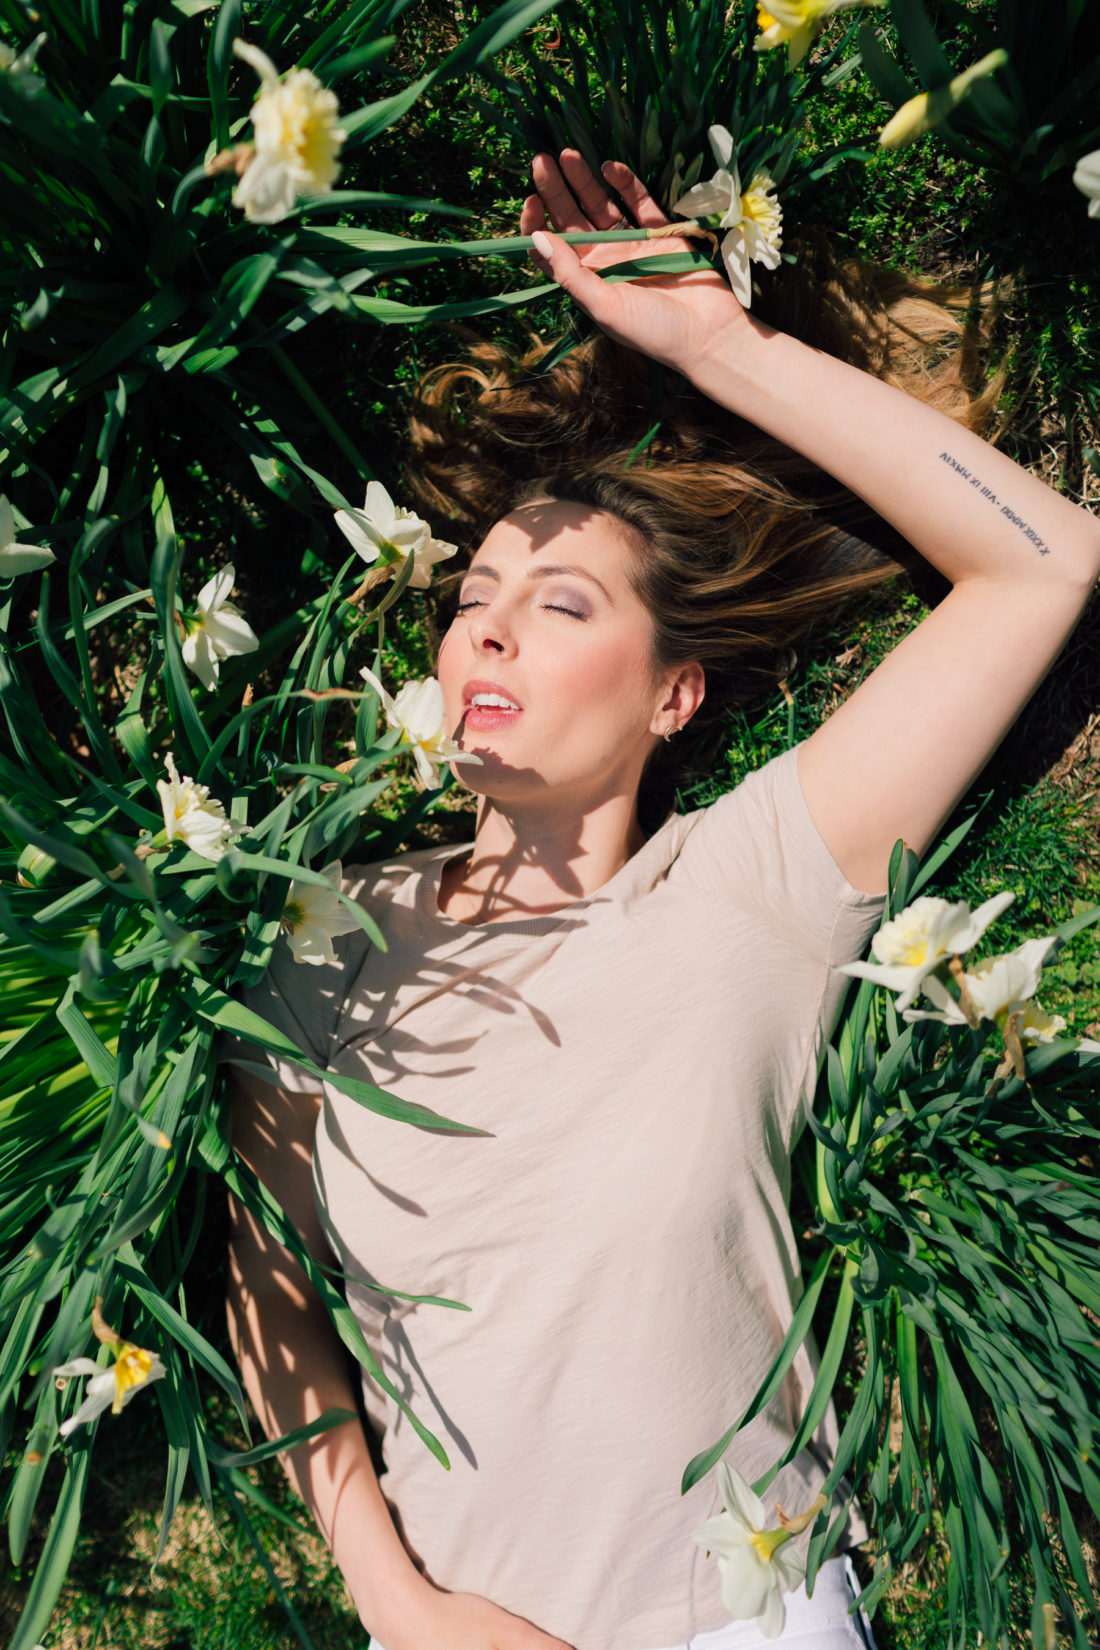 Eva Amurri Martino of Happily Eva After lies in a pile of daffodils and shares her favorite nude colored pieces for spring